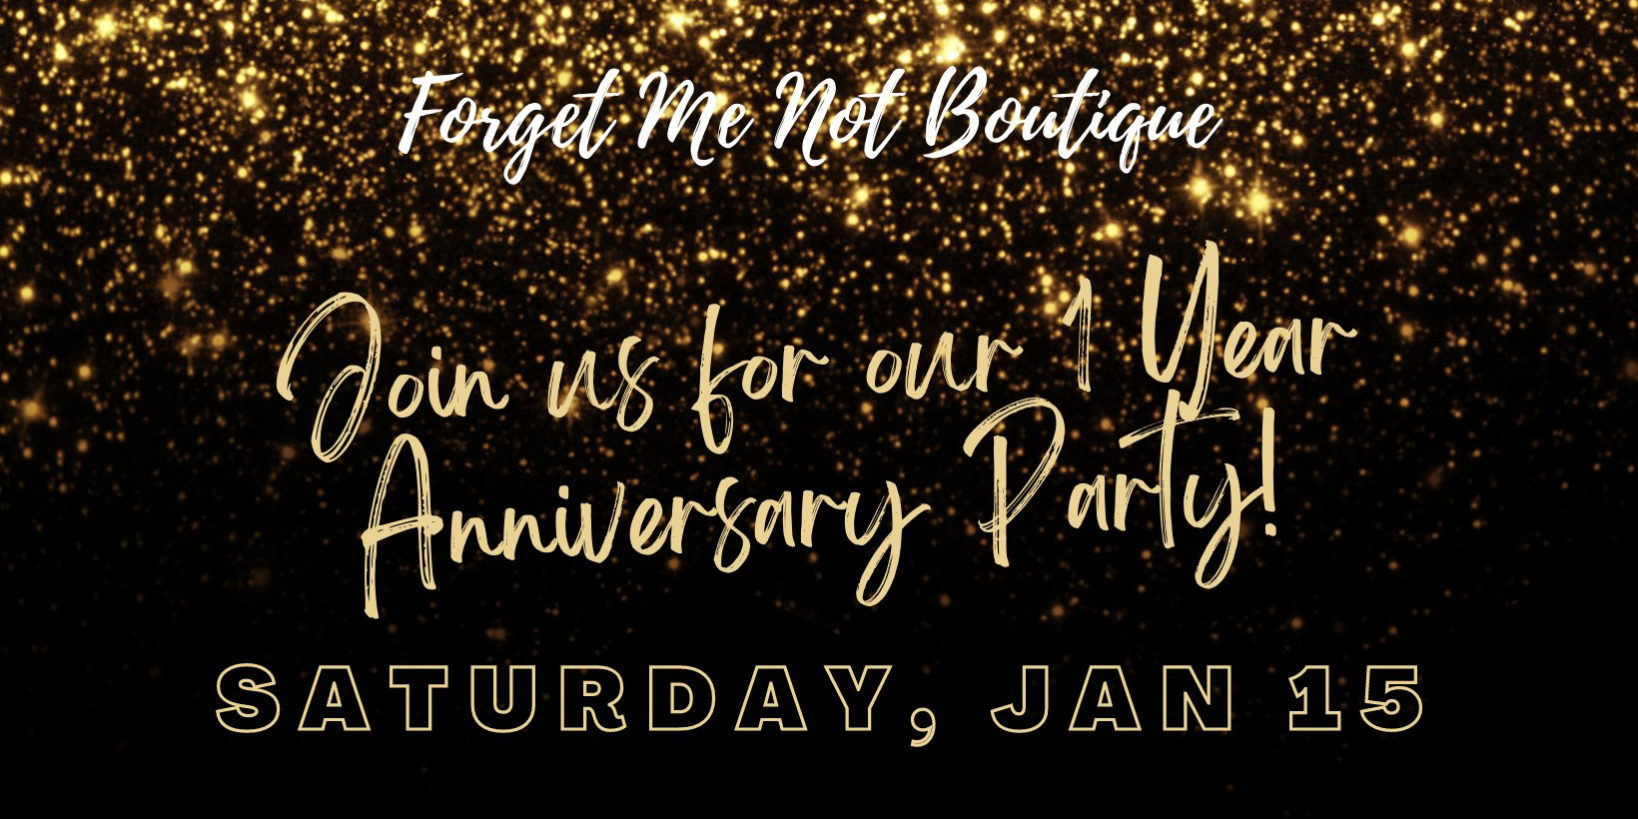 Forget Me Not Boutique's Anniversary Party.